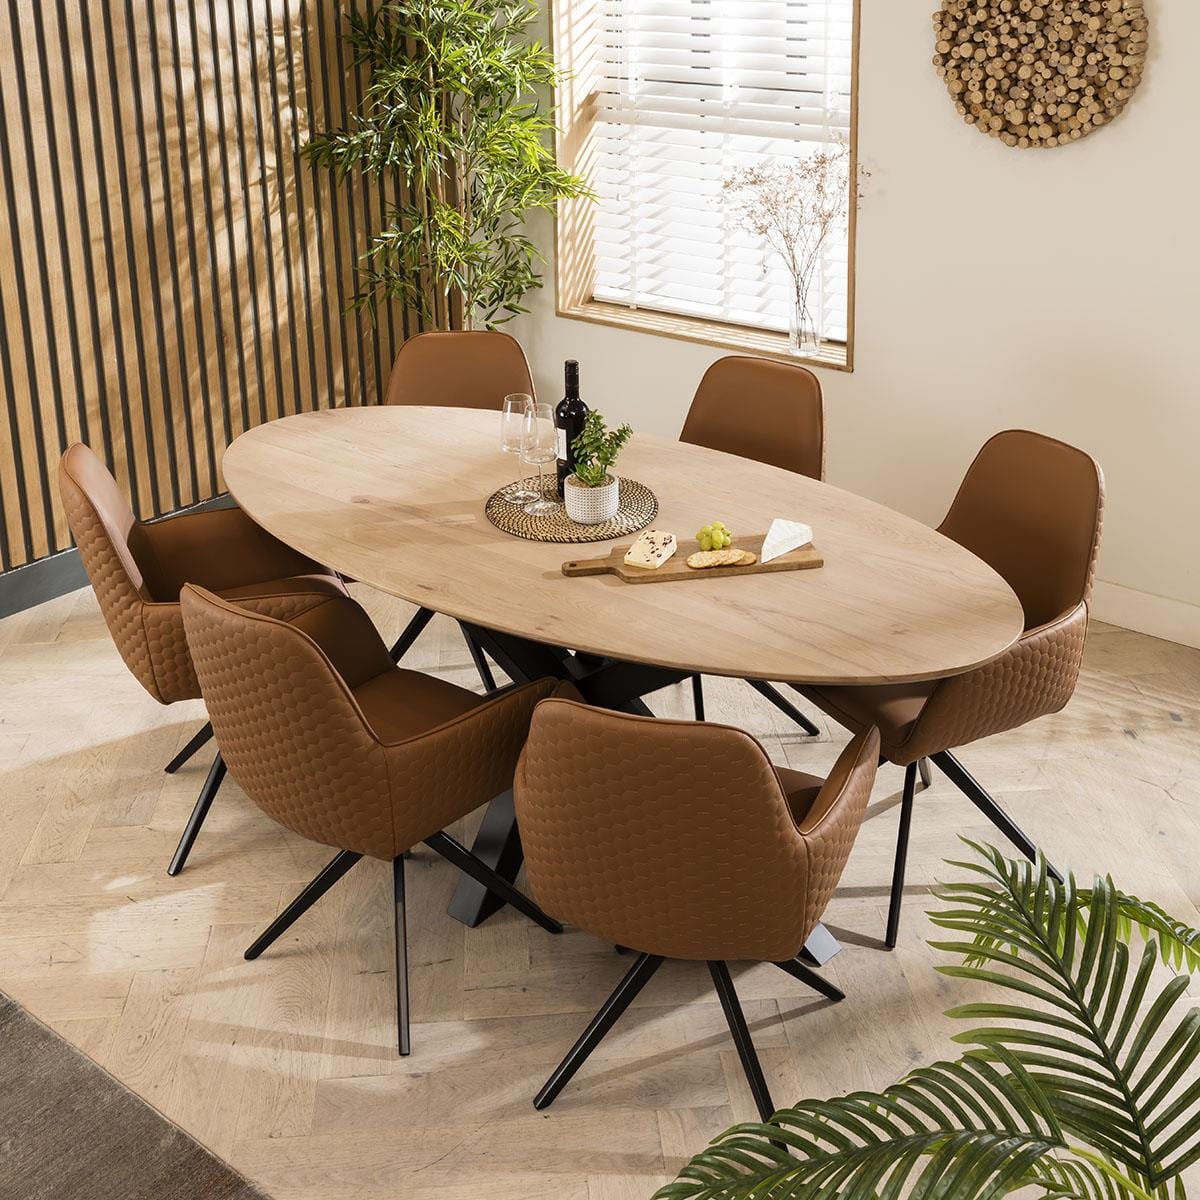 Quatropi Emma Solid Wood Natural Oval Dining Table And 6 Chairs Set Tan